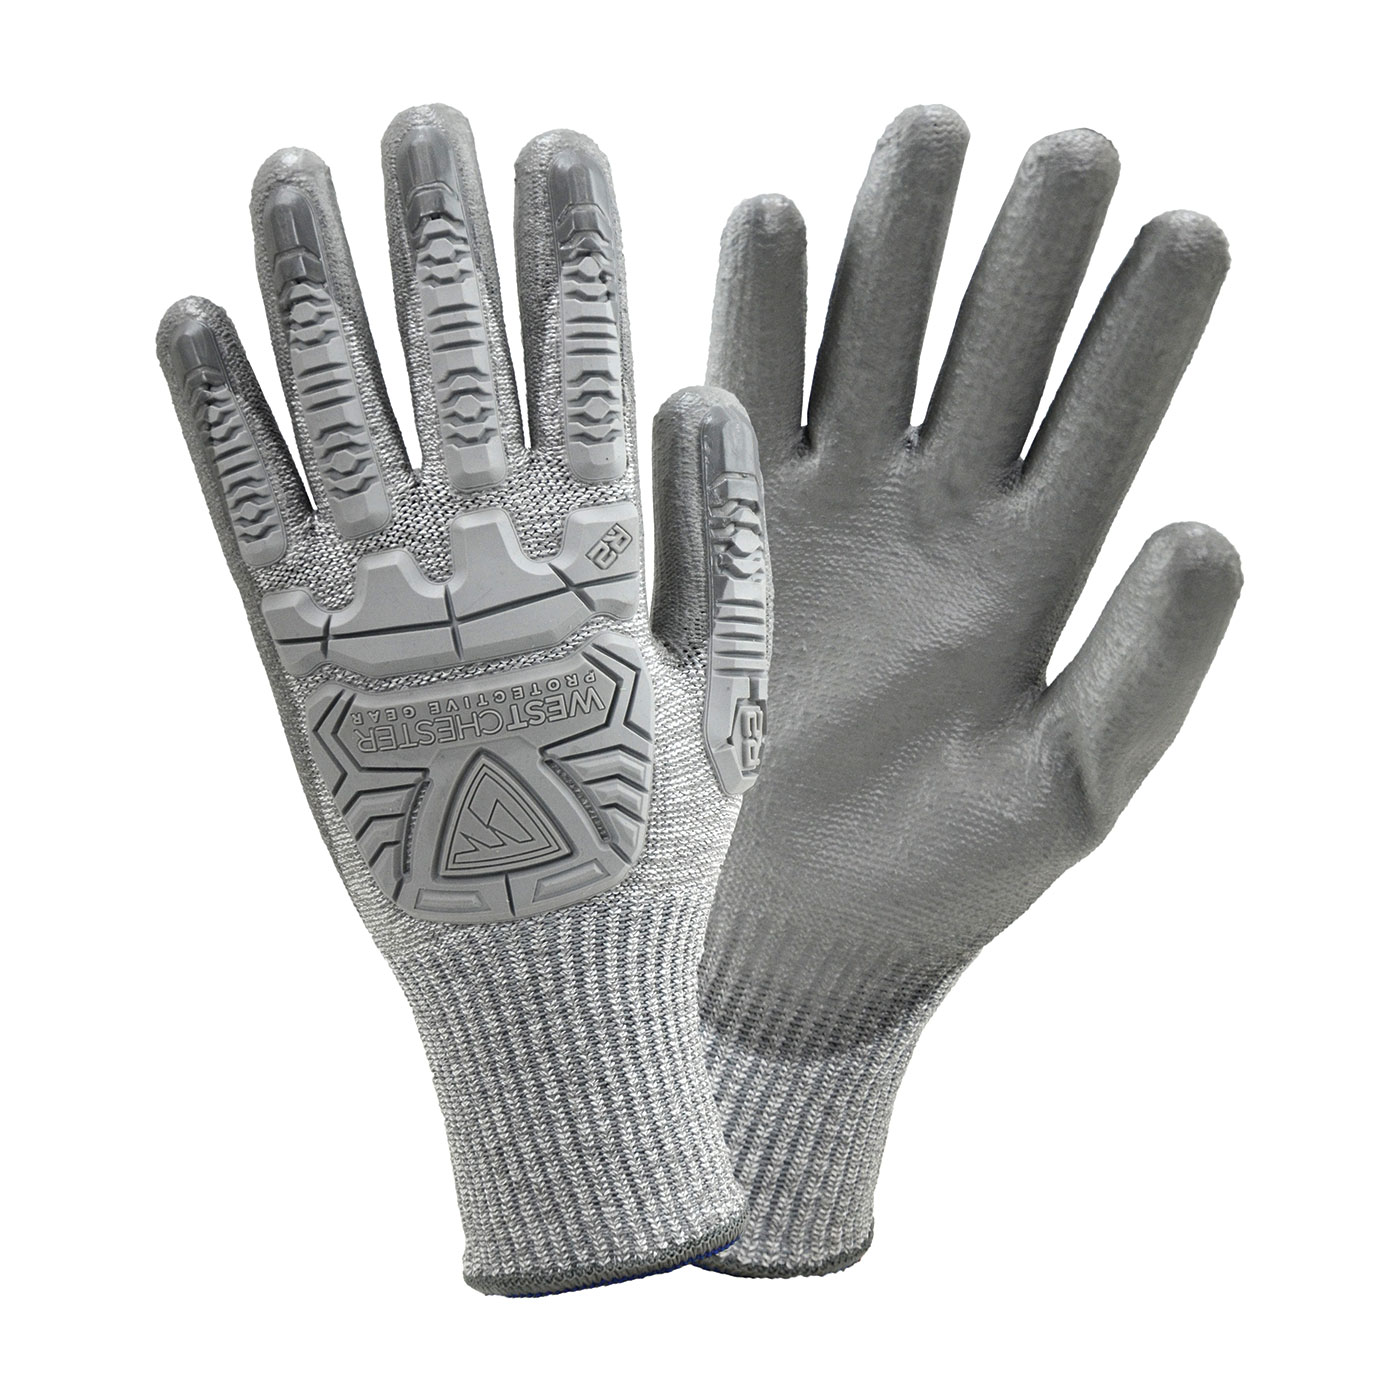 #710HGUB PIP® R2 Silver Fox Seamless Knit Glove with Impact Protection and PU Coated Palm Grip